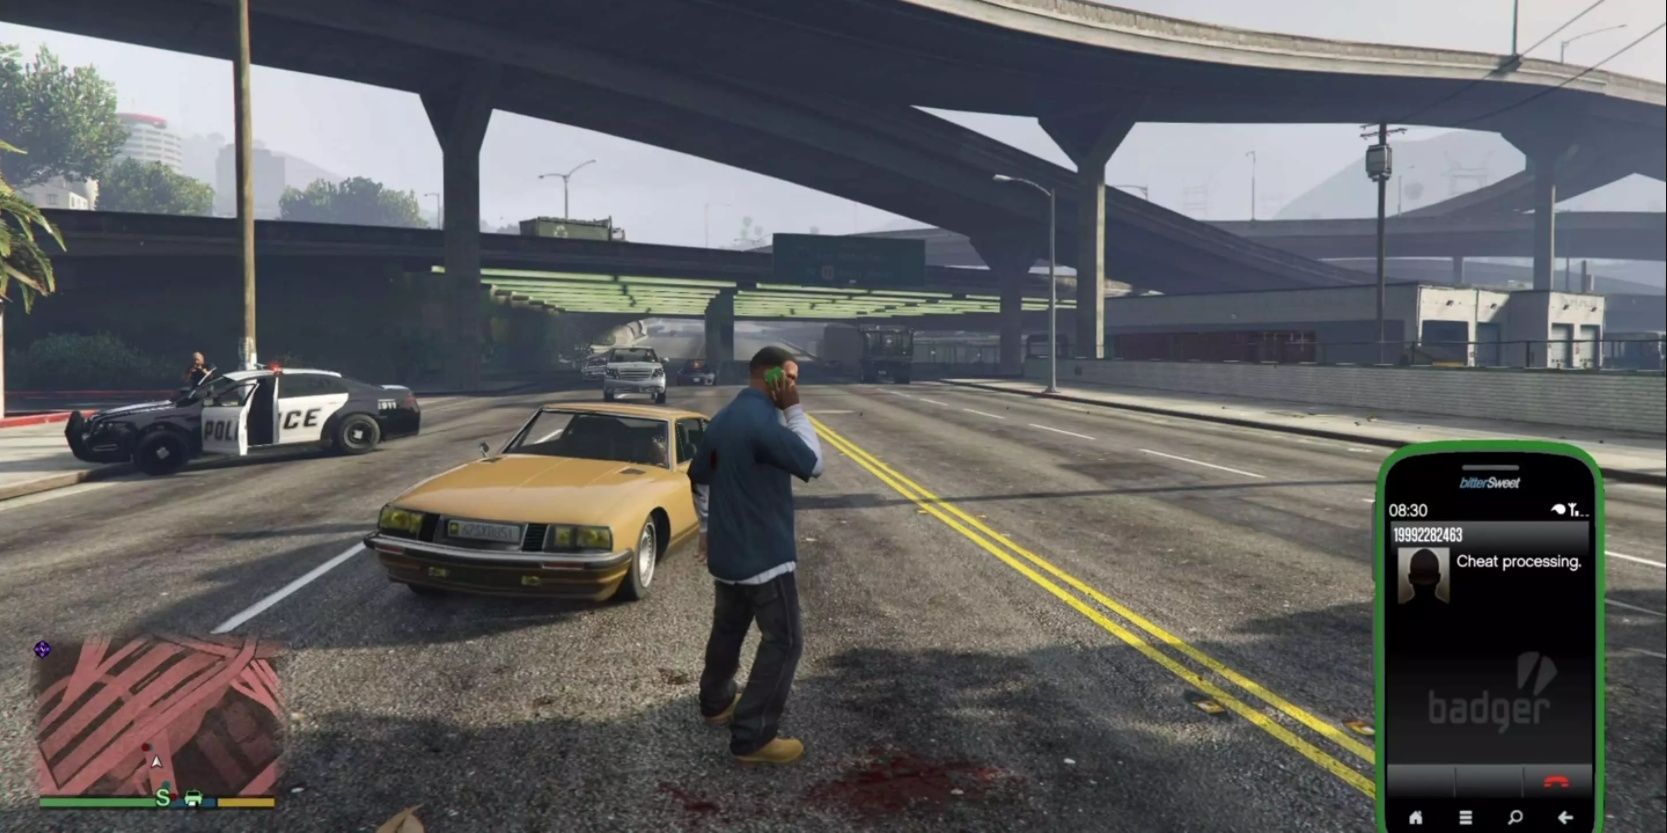 Dialing a phone number cheat in Grand Theft Auto V